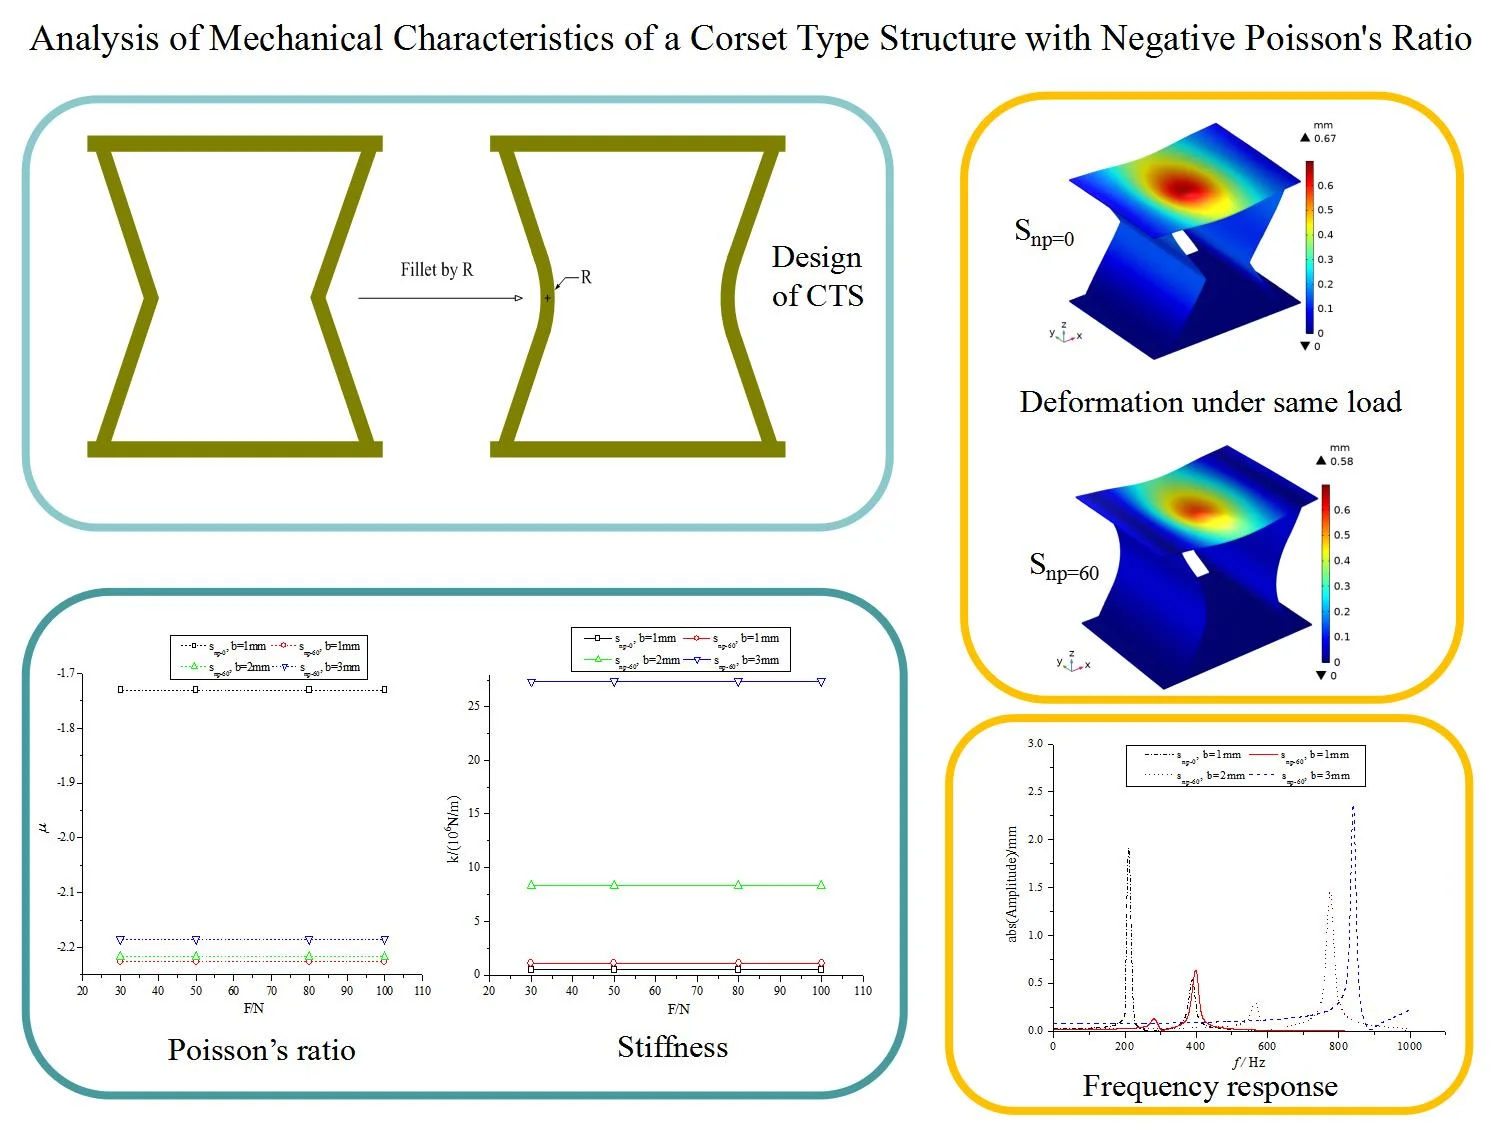 Mechanical characteristics of a corset type structure with negative Poisson’s ratio